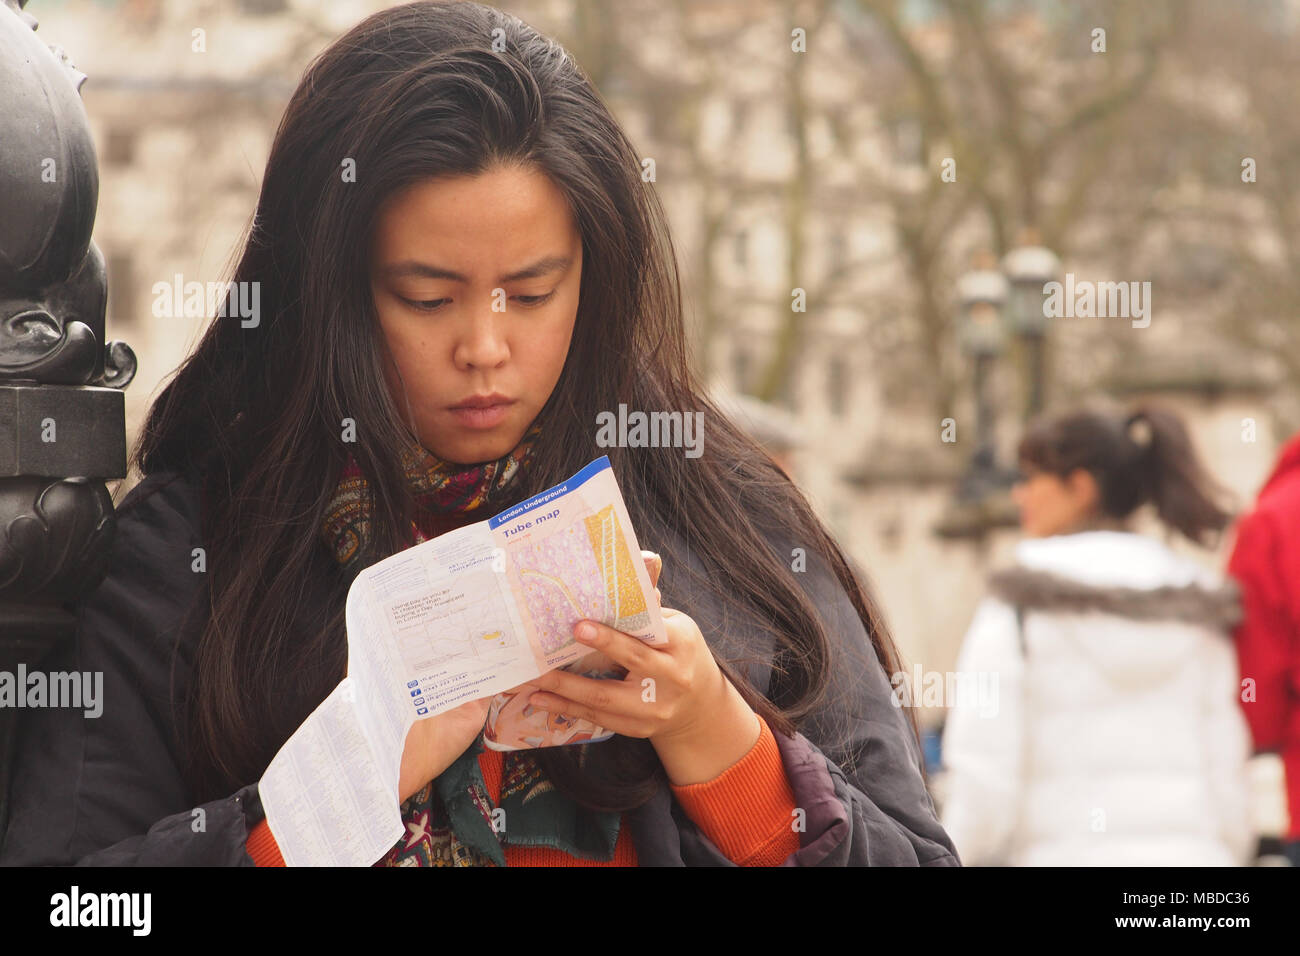 A young woman studying a handbag sized Tube map of the London Underground in Trafalgar Square, London Stock Photo